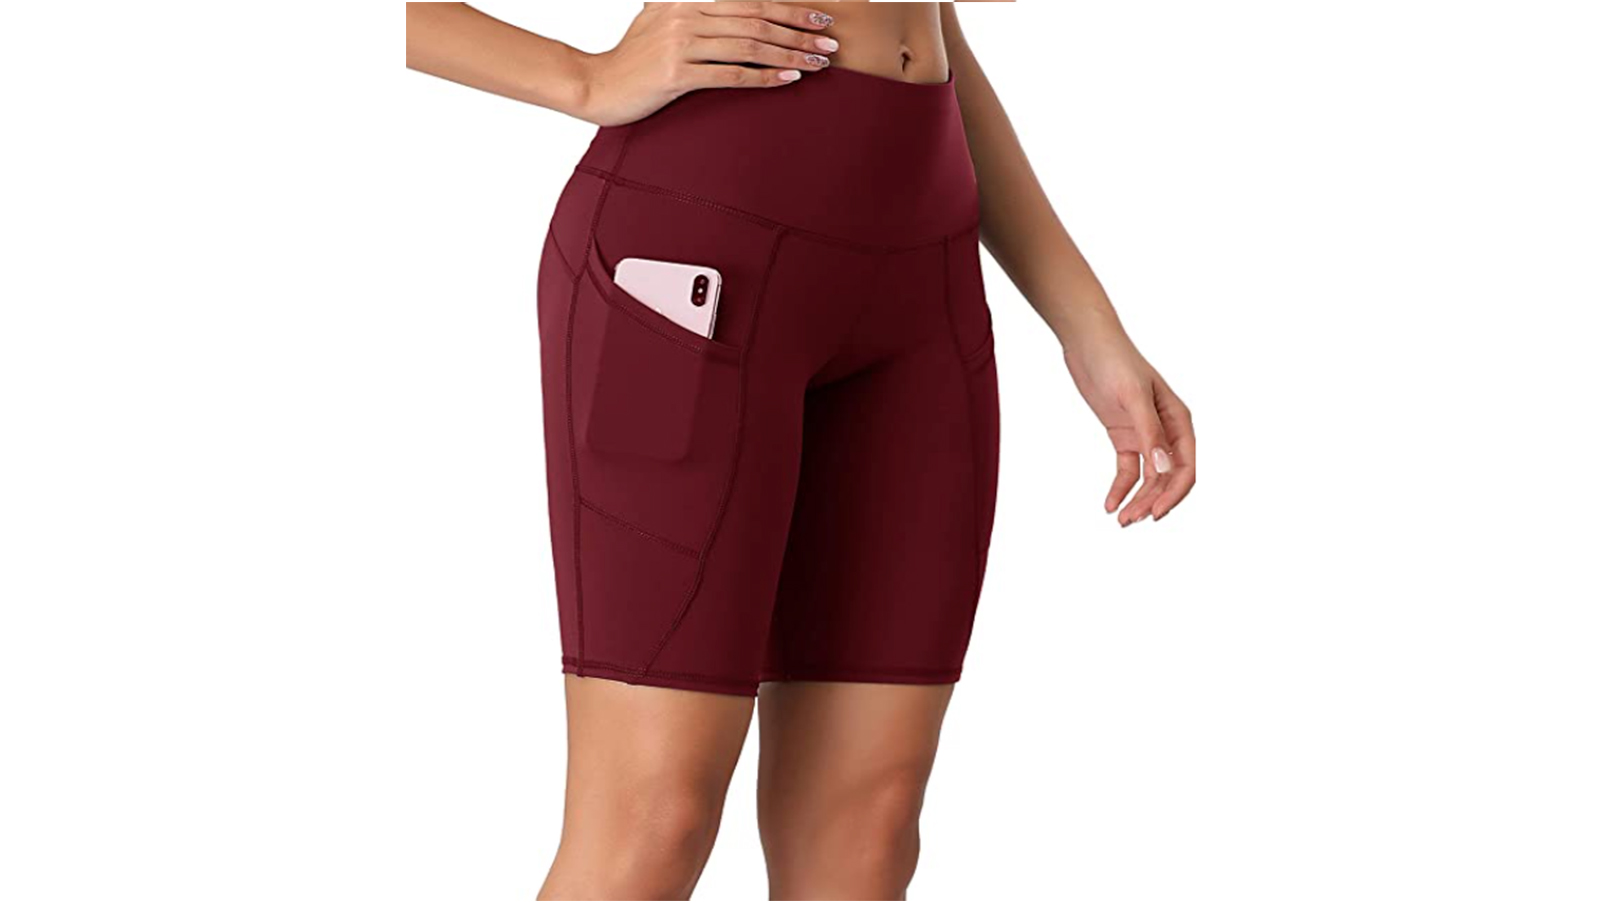 12) Oalka Women's Yoga Shorts With Side Pockets